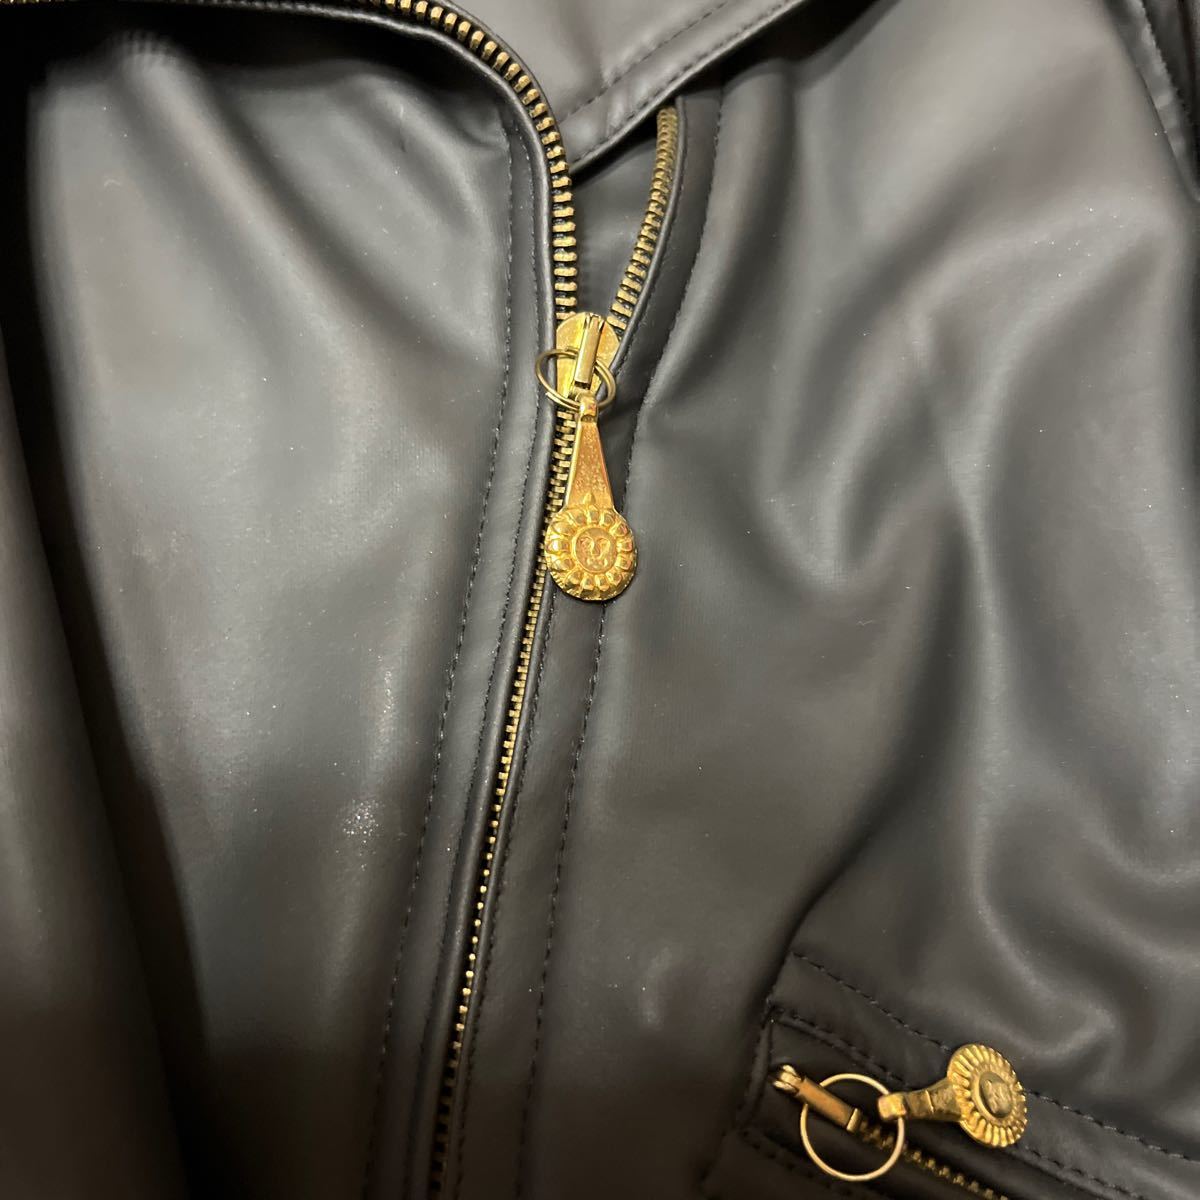  super value exhibition smaller size VERSACE Lady\'s leather cotton inside rider jacket 38 used almost new goods 